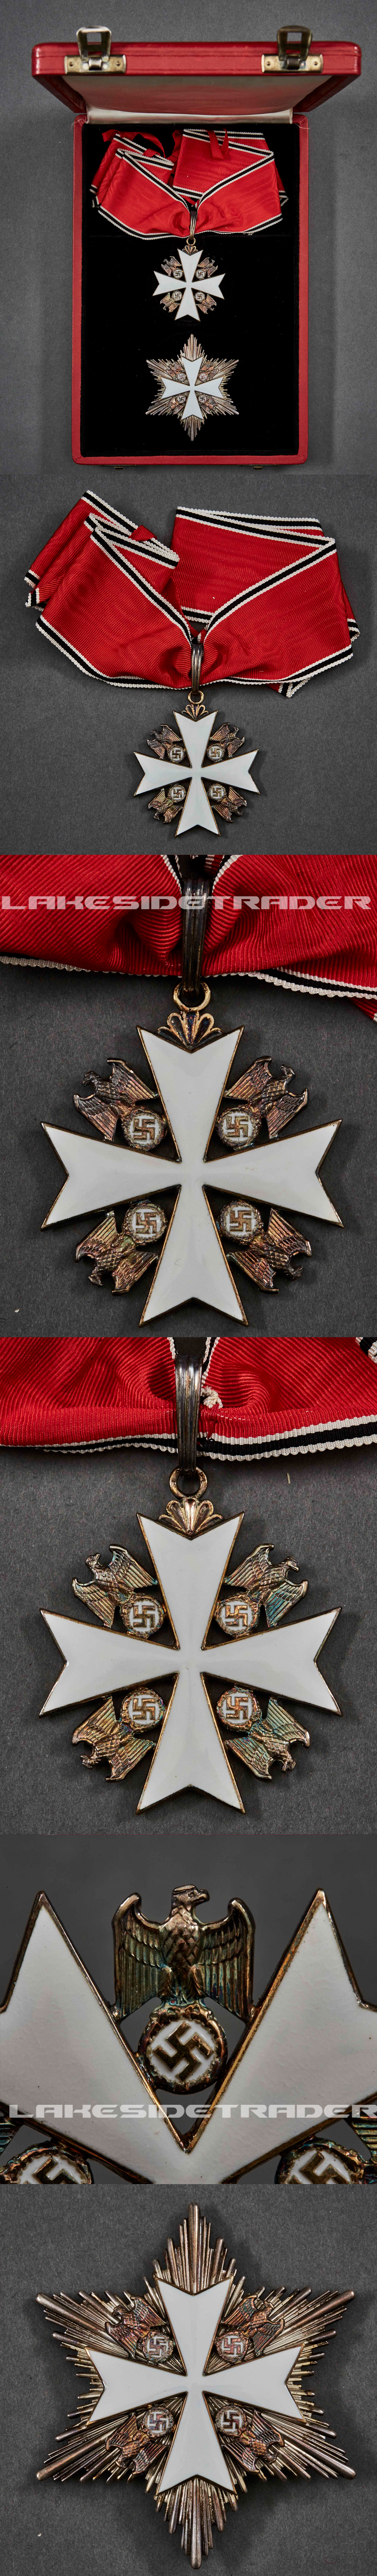 Order of the German Eagle Neck Cross and Star by Godet 